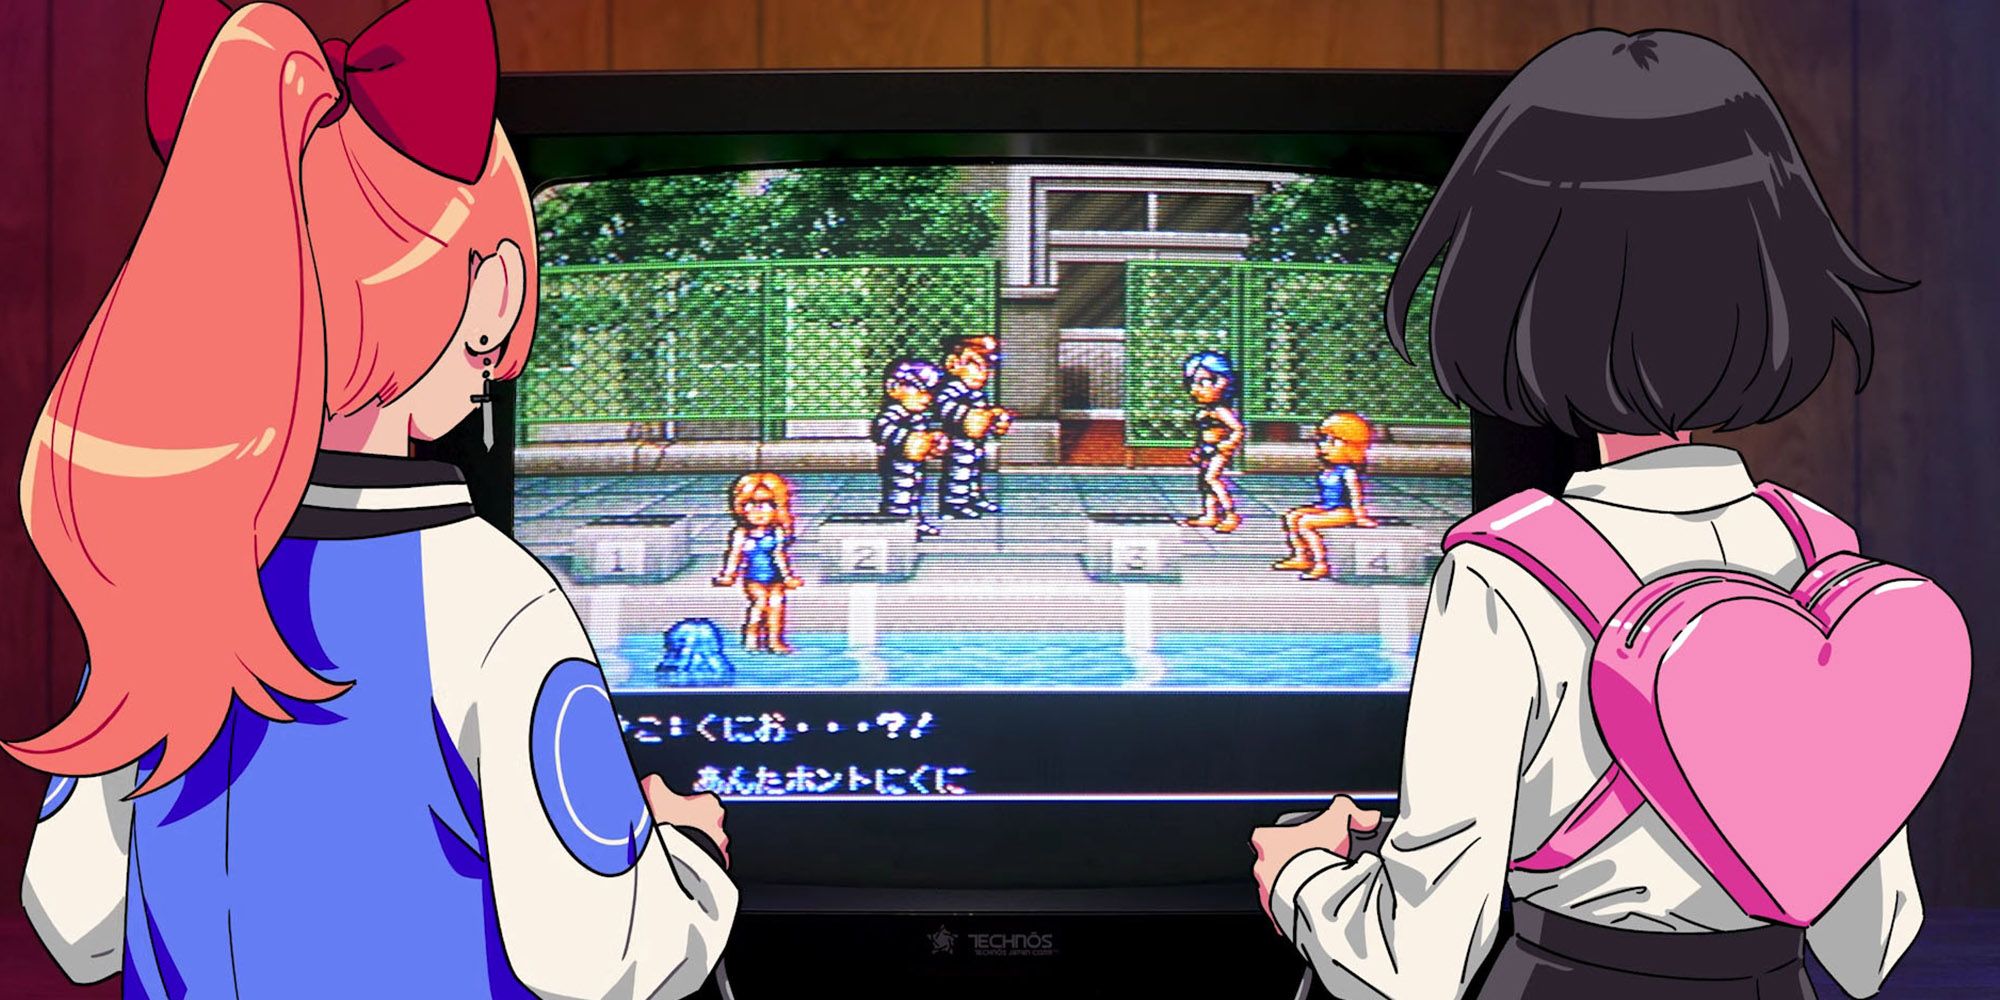 River City Girls - The Girls Playing River City Ransom